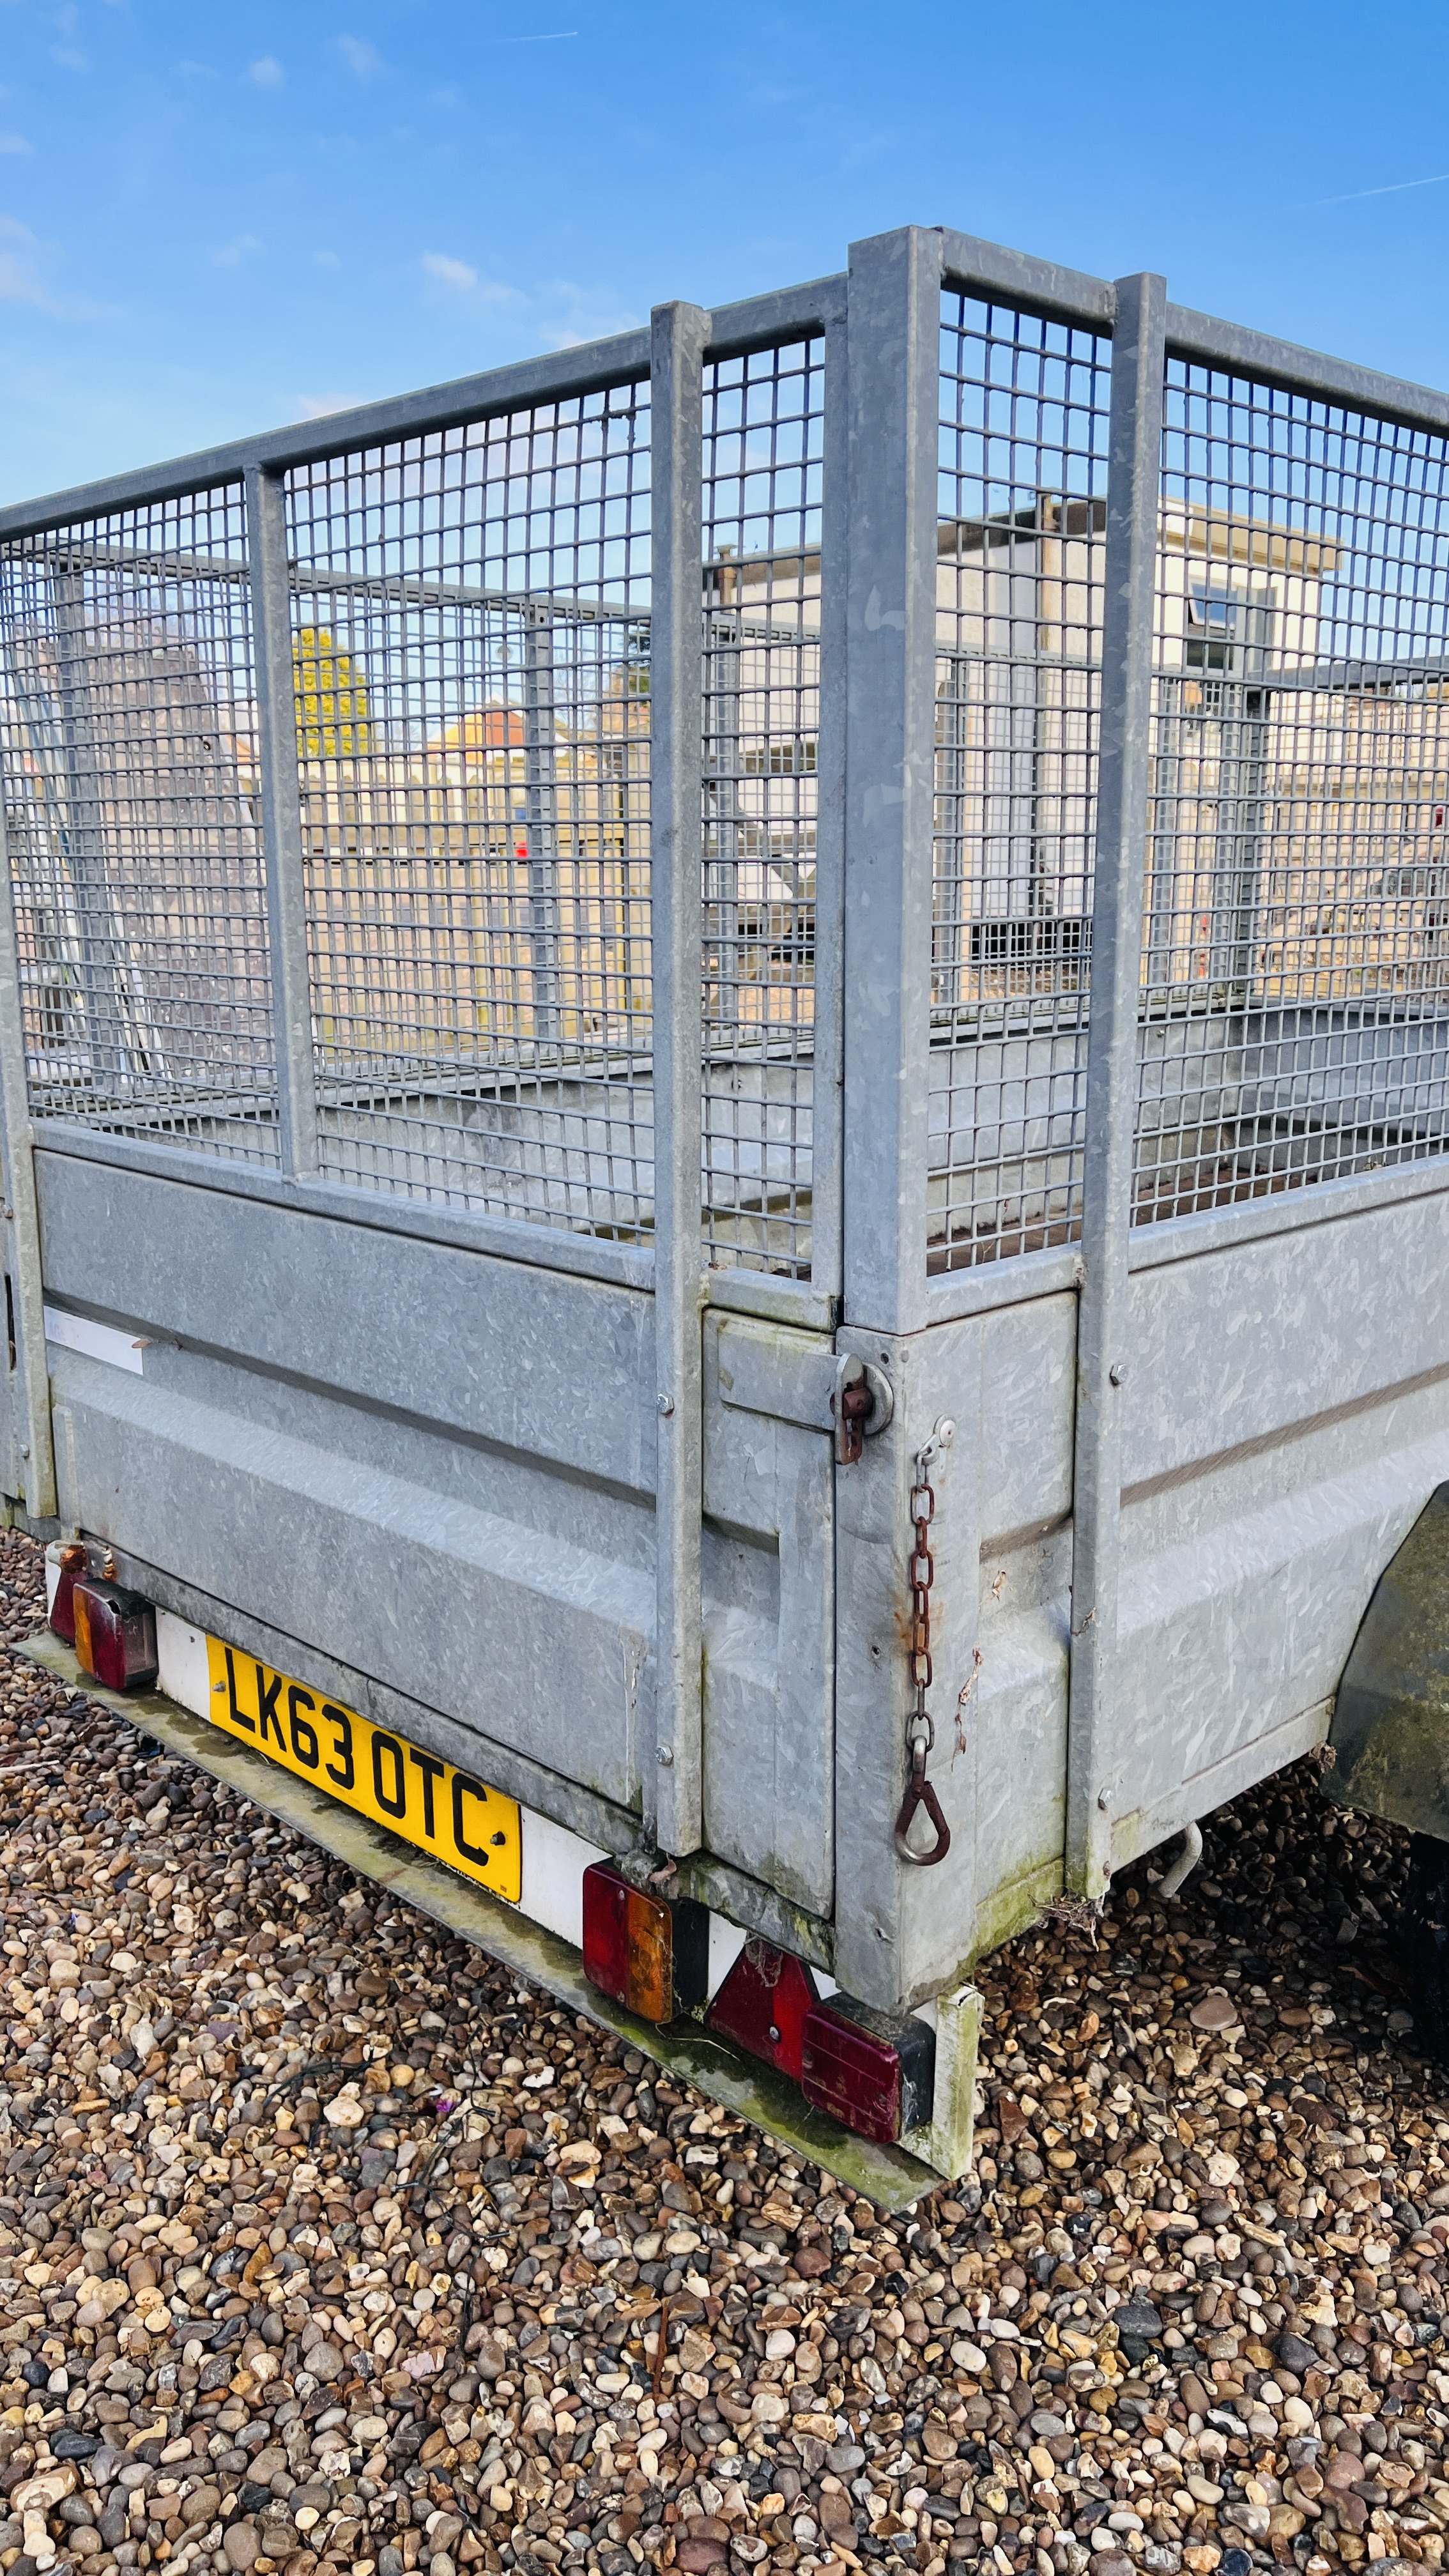 A PAGE TRAILERS TWIN AXLE GALVANISED CAR TRAILER WITH CAGE TOP, 8FT 7INCH X 4FT 7 INCH. - Image 13 of 14